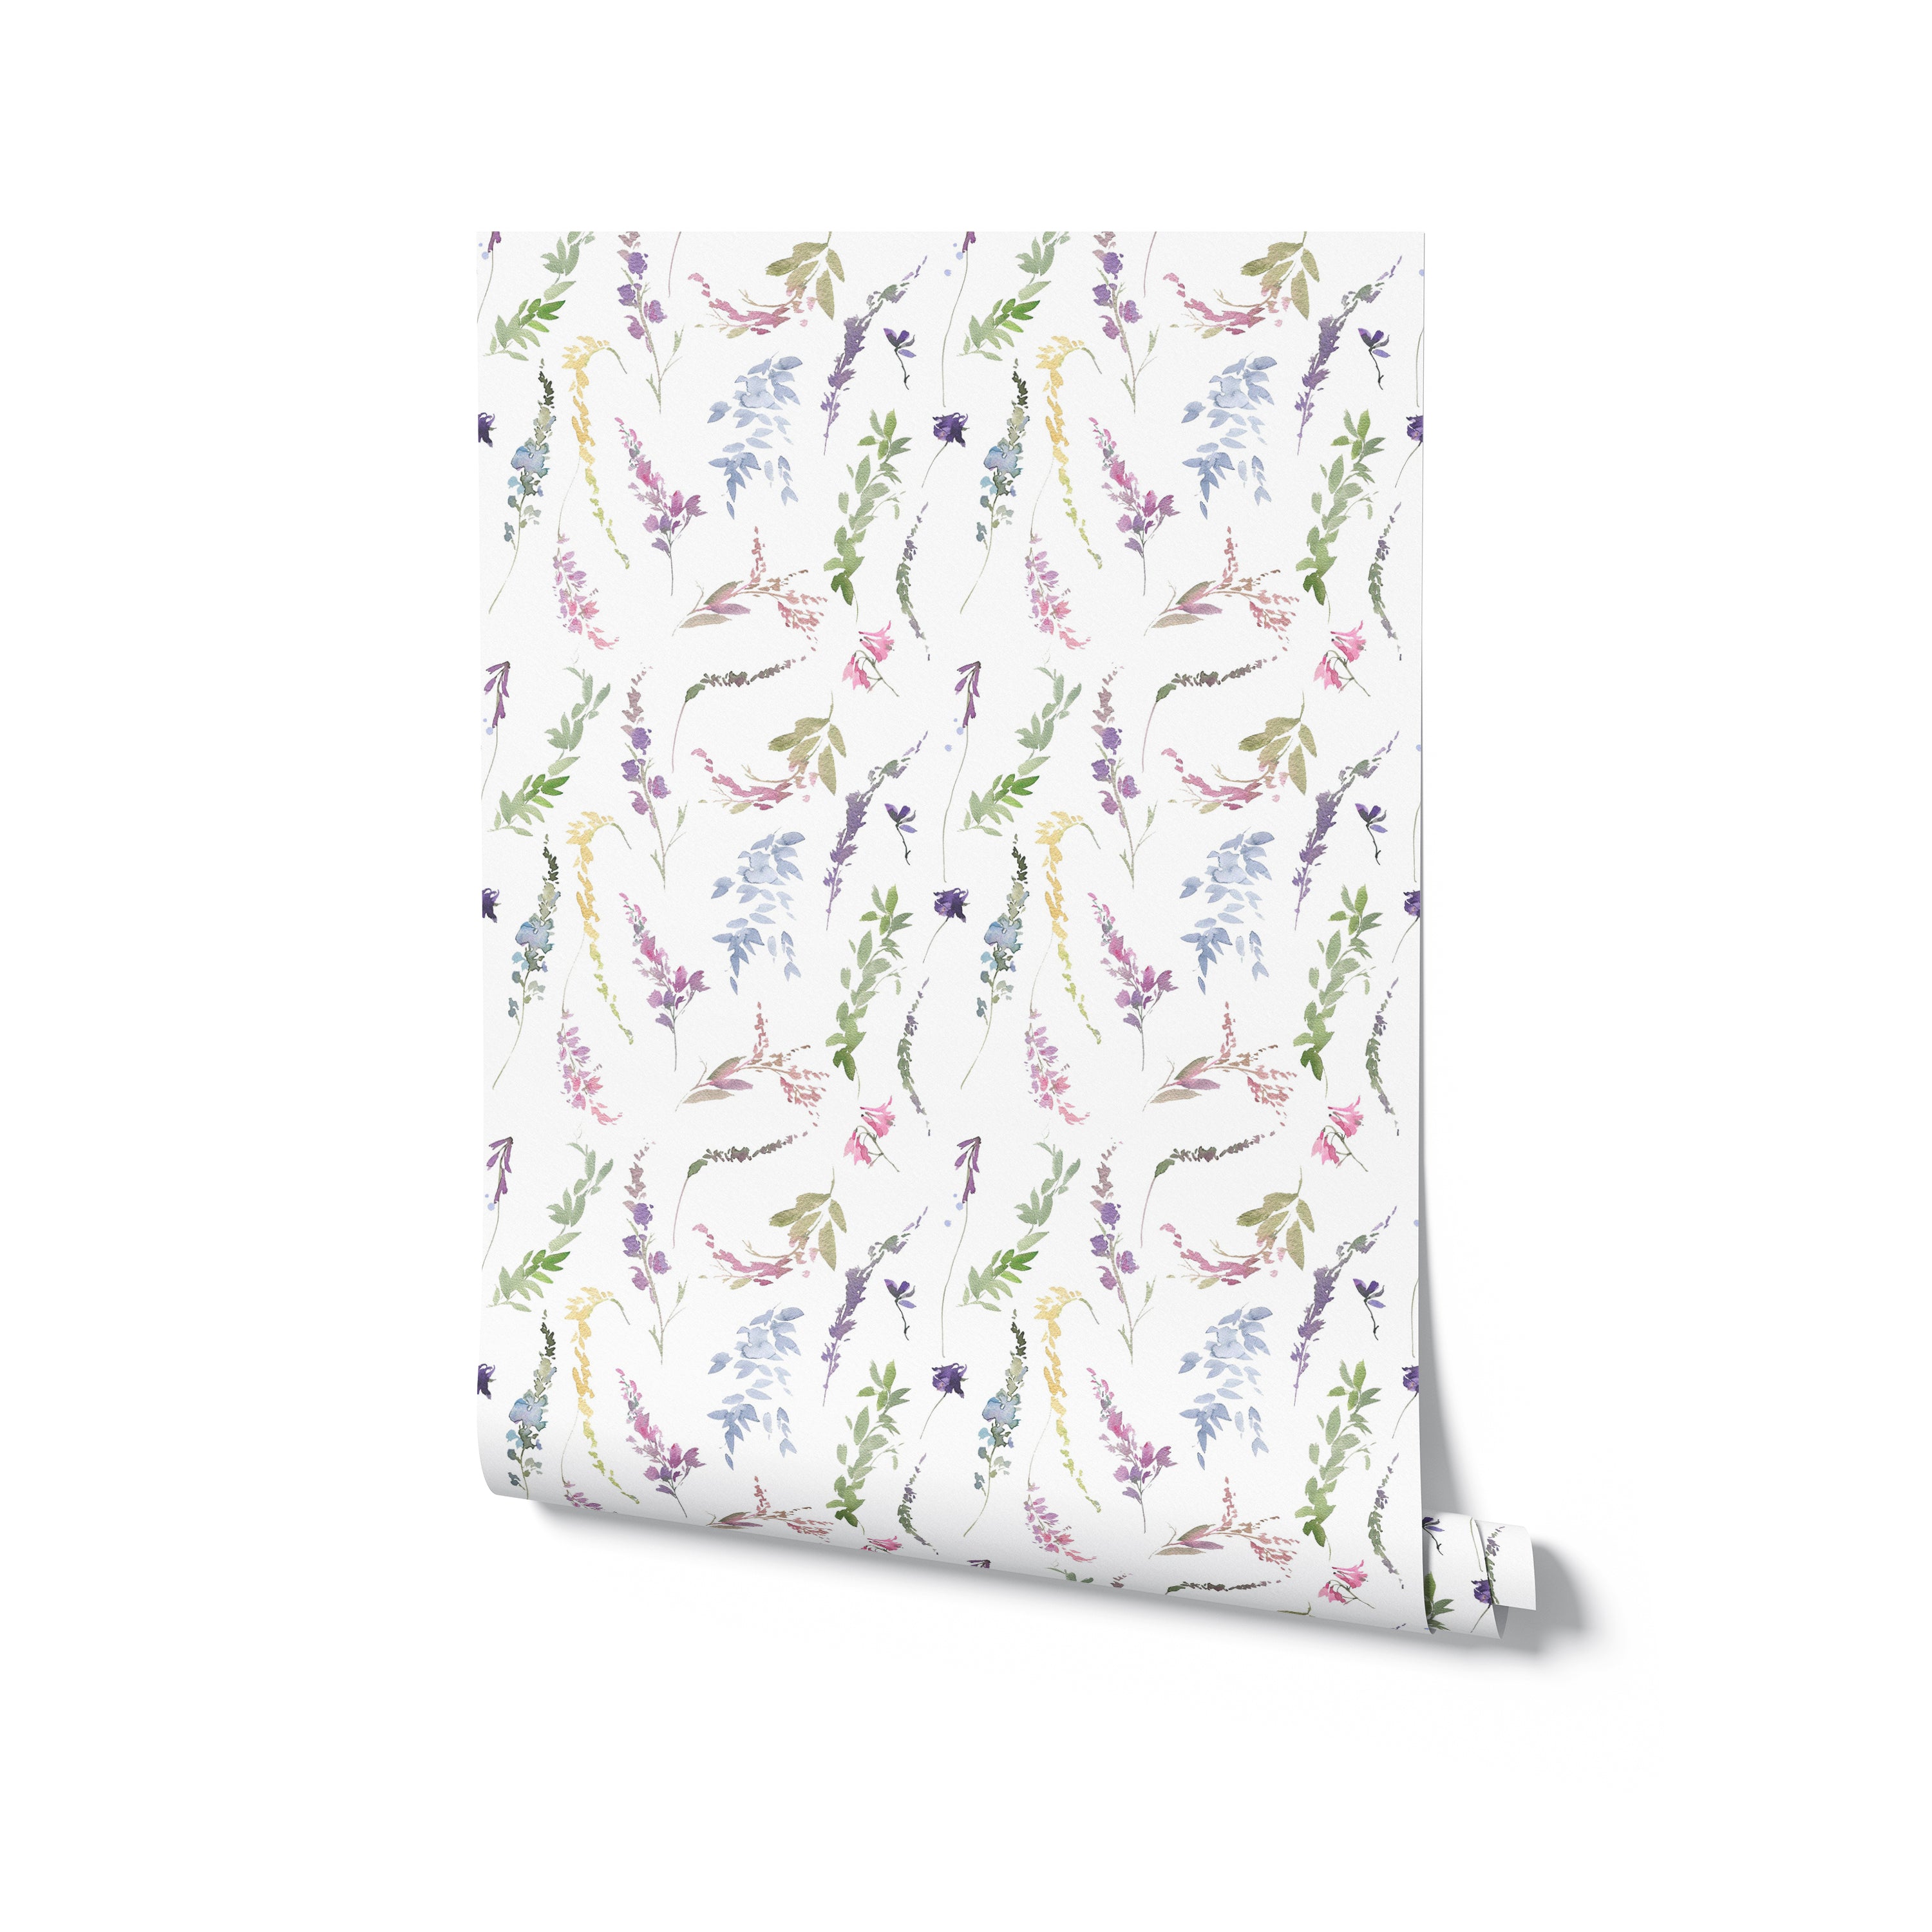 Mockup of the Spring Fling Wallpaper roll showcasing the full pattern of watercolor wildflowers and foliage in pastel colors on a white background, perfect for adding a fresh and lively touch to any room